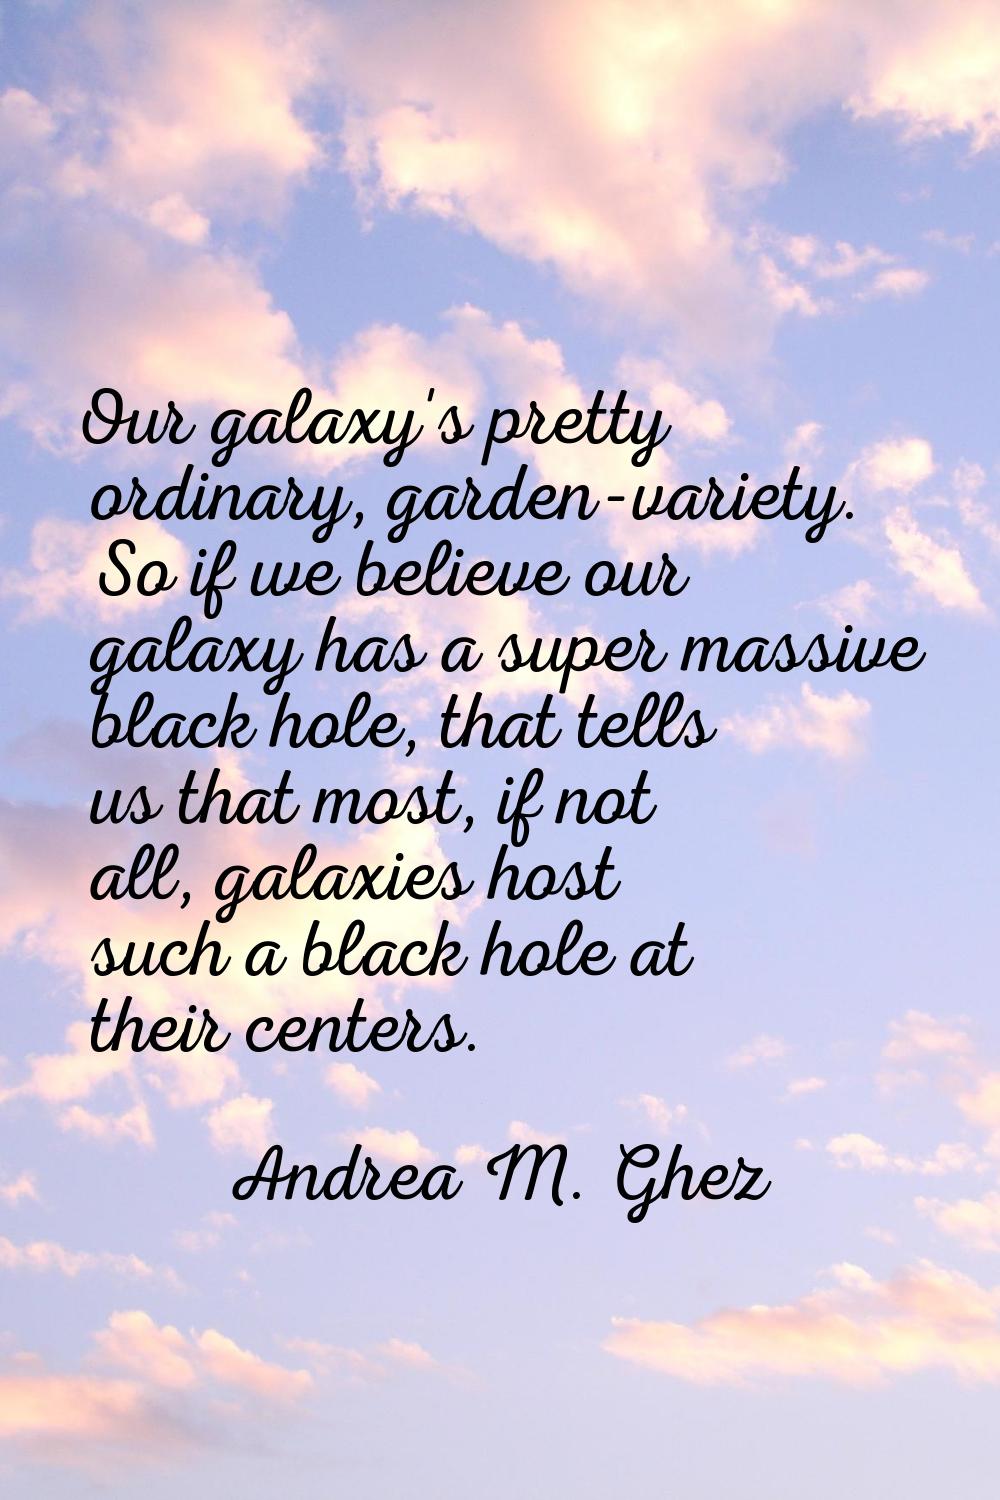 Our galaxy's pretty ordinary, garden-variety. So if we believe our galaxy has a super massive black